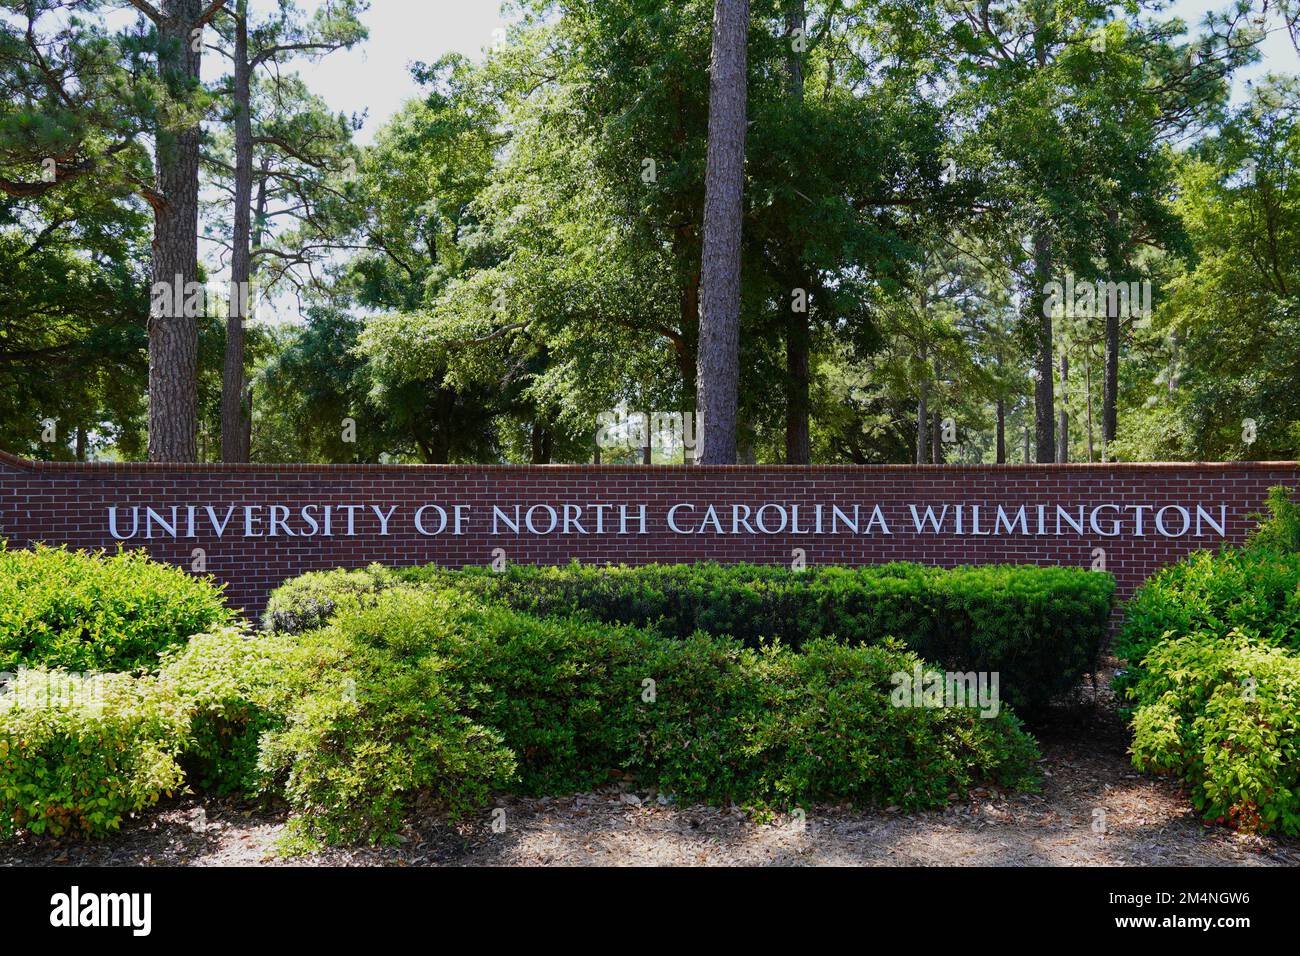 Sign for the University of North Carolina at Wilmington Stock Photo